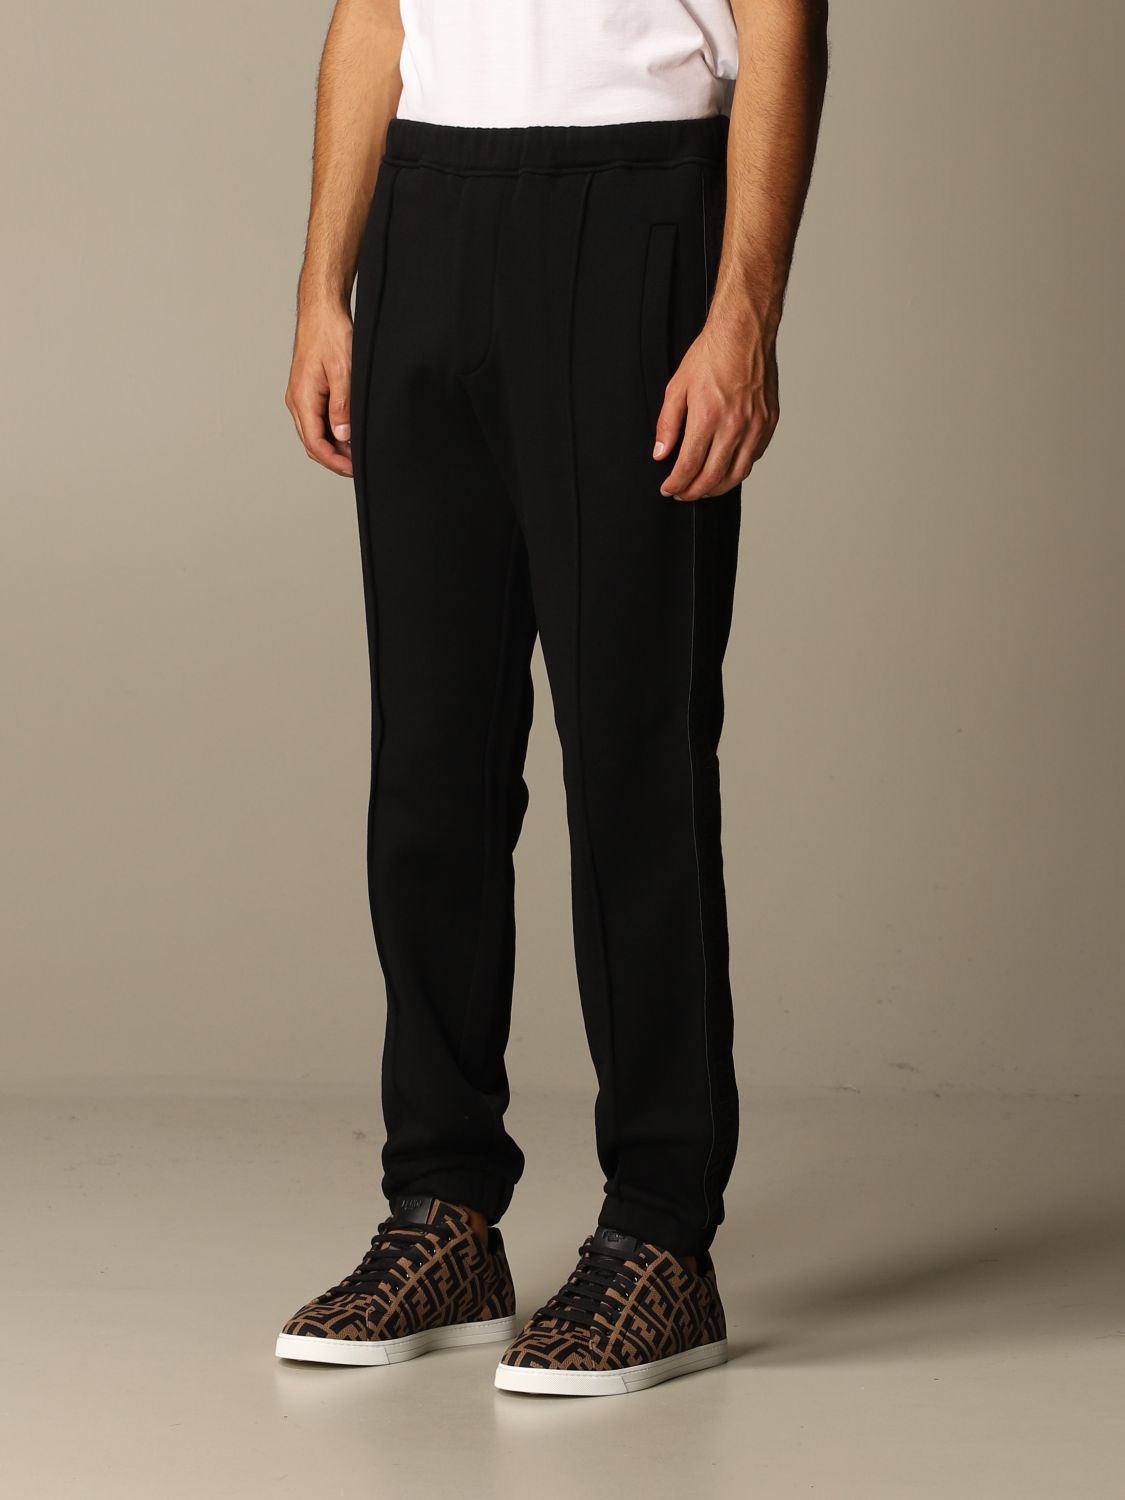 Wool and cotton blend jogging trousers with logoed bands | Pants Fendi ...